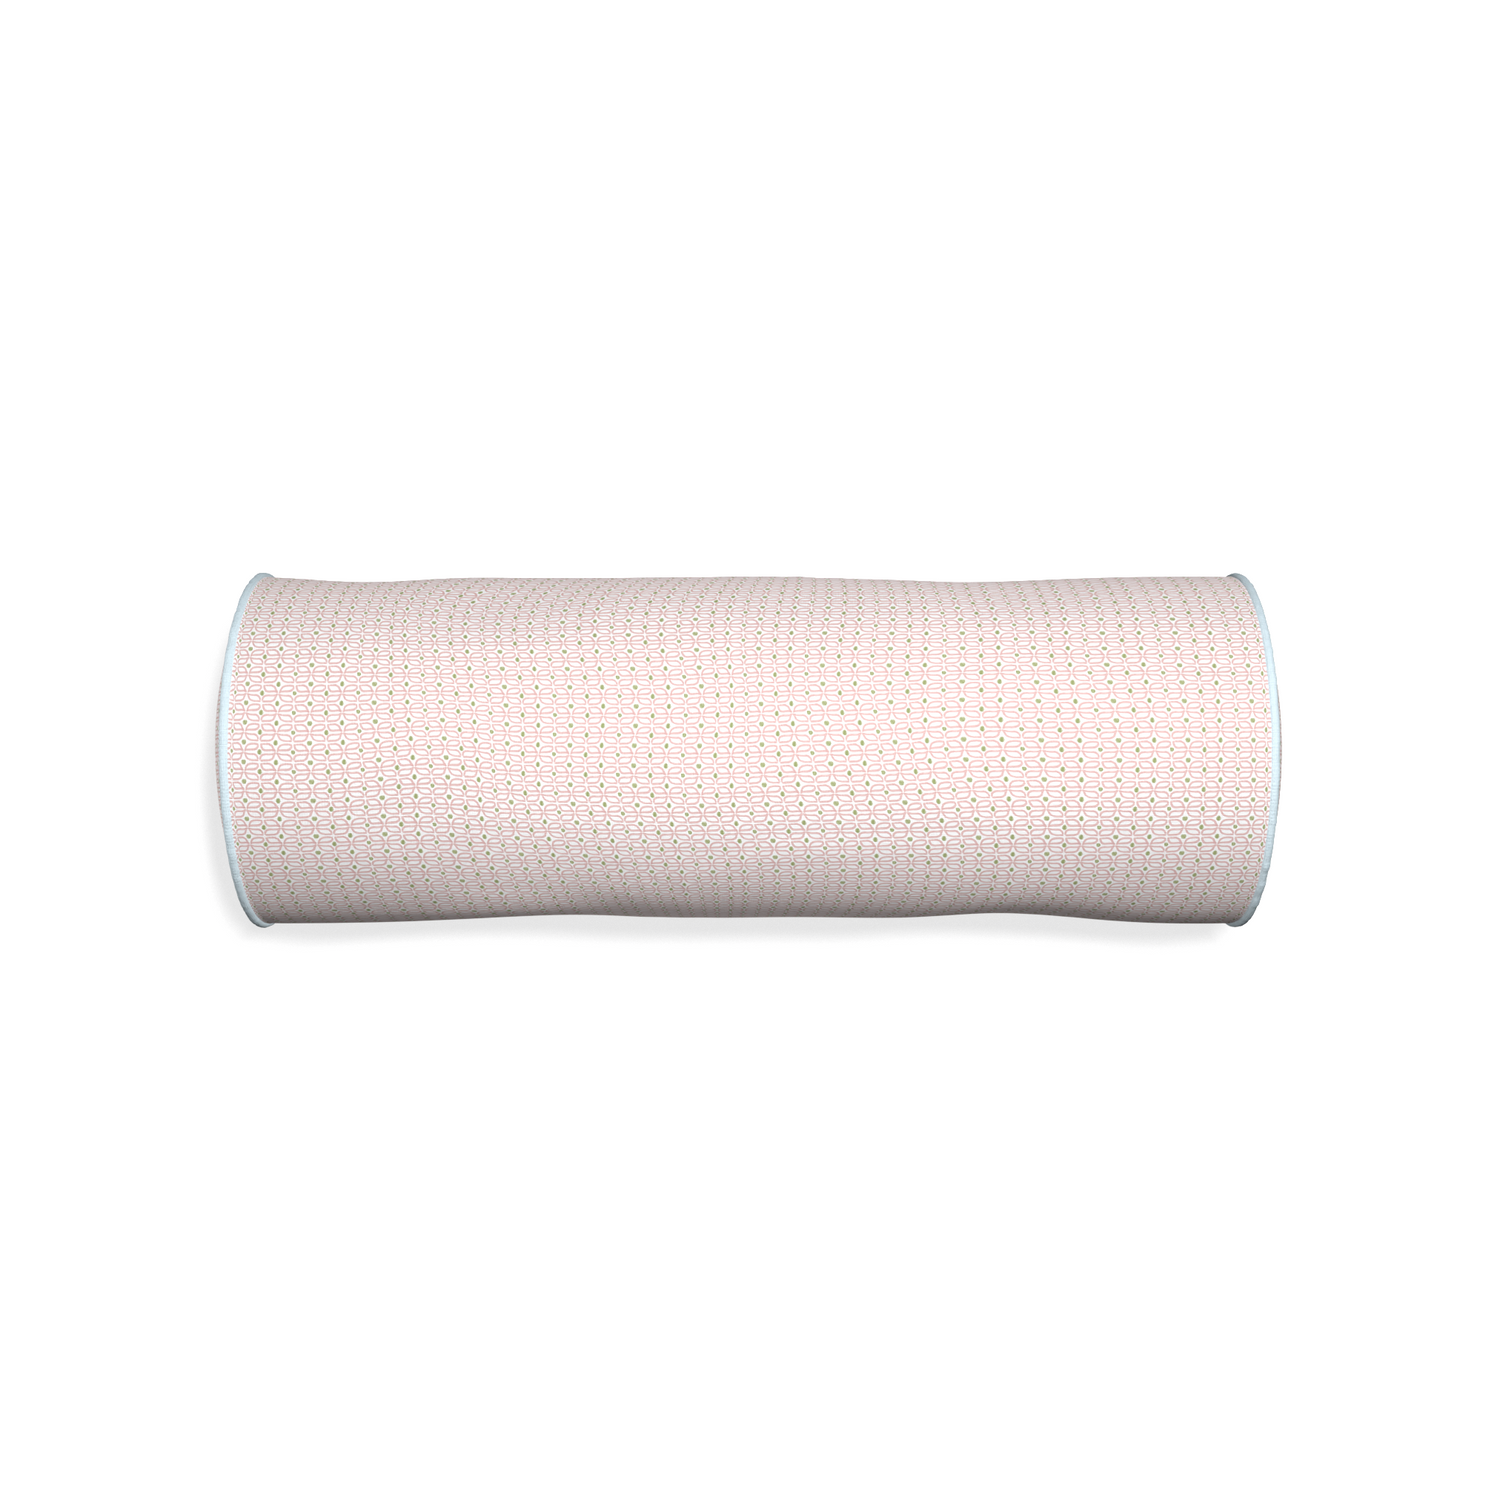 Bolster loomi pink custom pillow with powder piping on white background